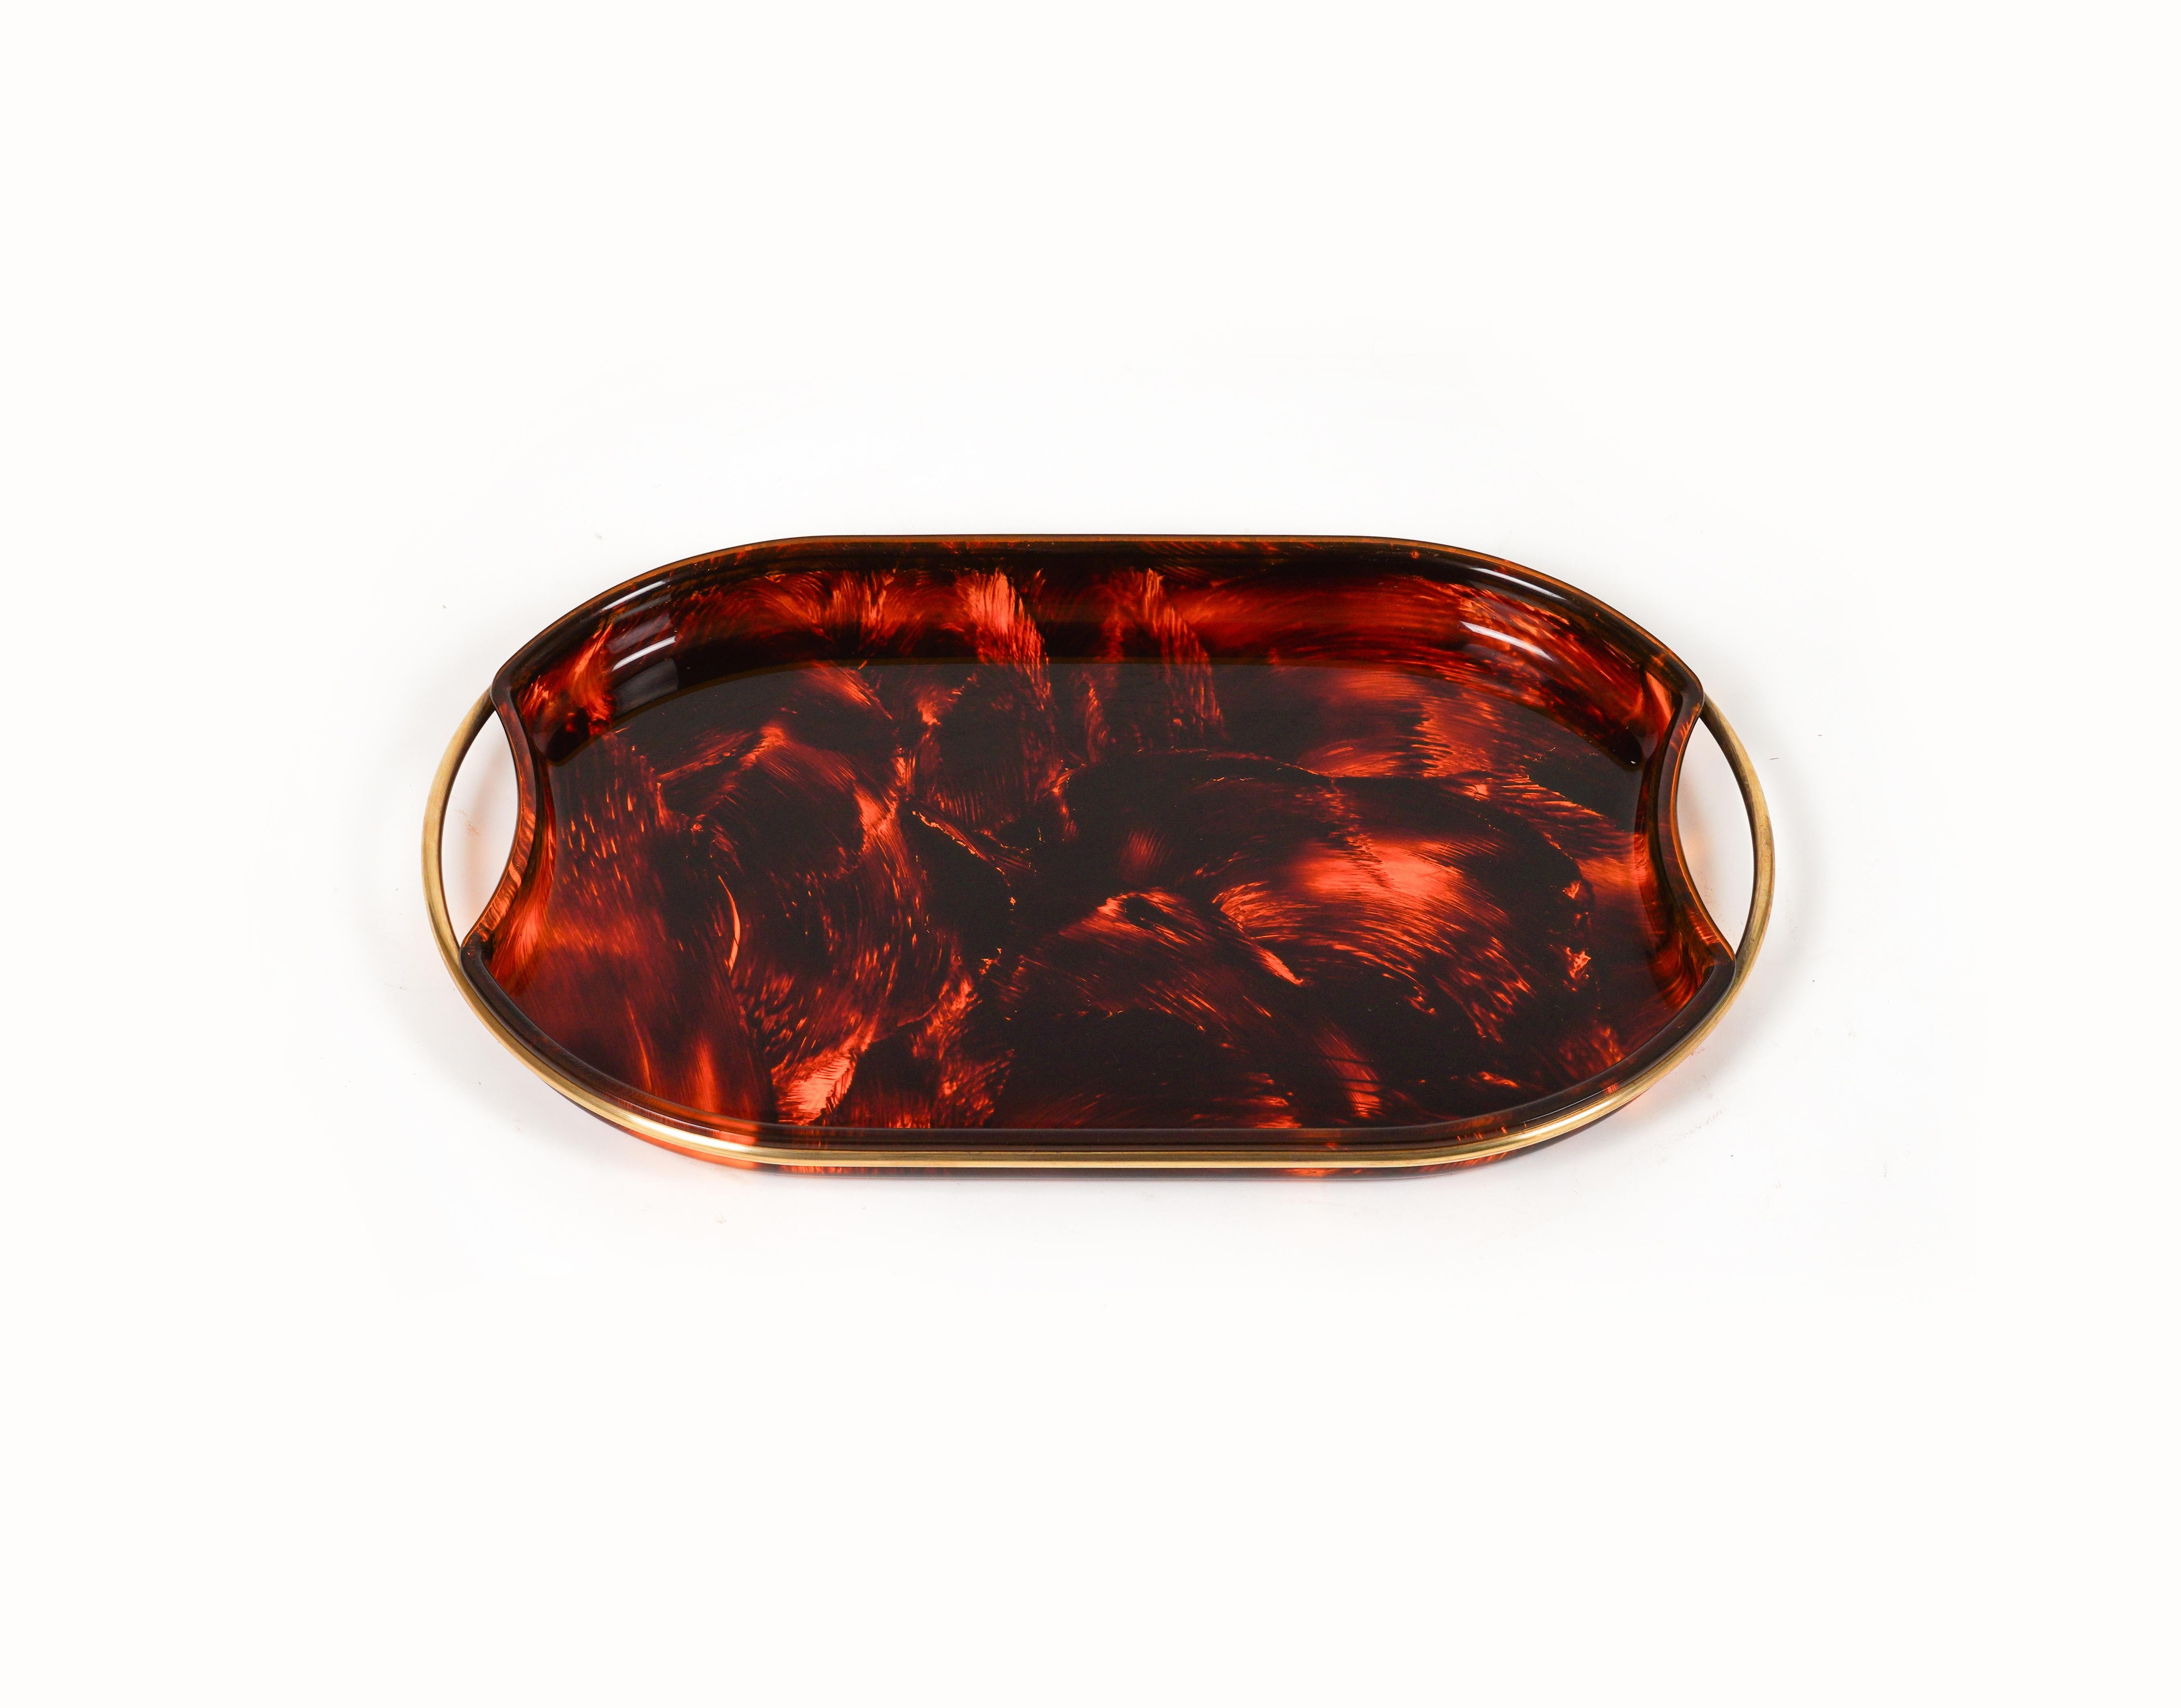 Midcentury amazing oval serving tray in faux tortoiseshell-effect Lucite featuring brass handles and borders by Team Guzzini.  

Made in Italy in the 1970s.  

It's an iconic tray or plate made of lucite that will wow your guests and is perfect for